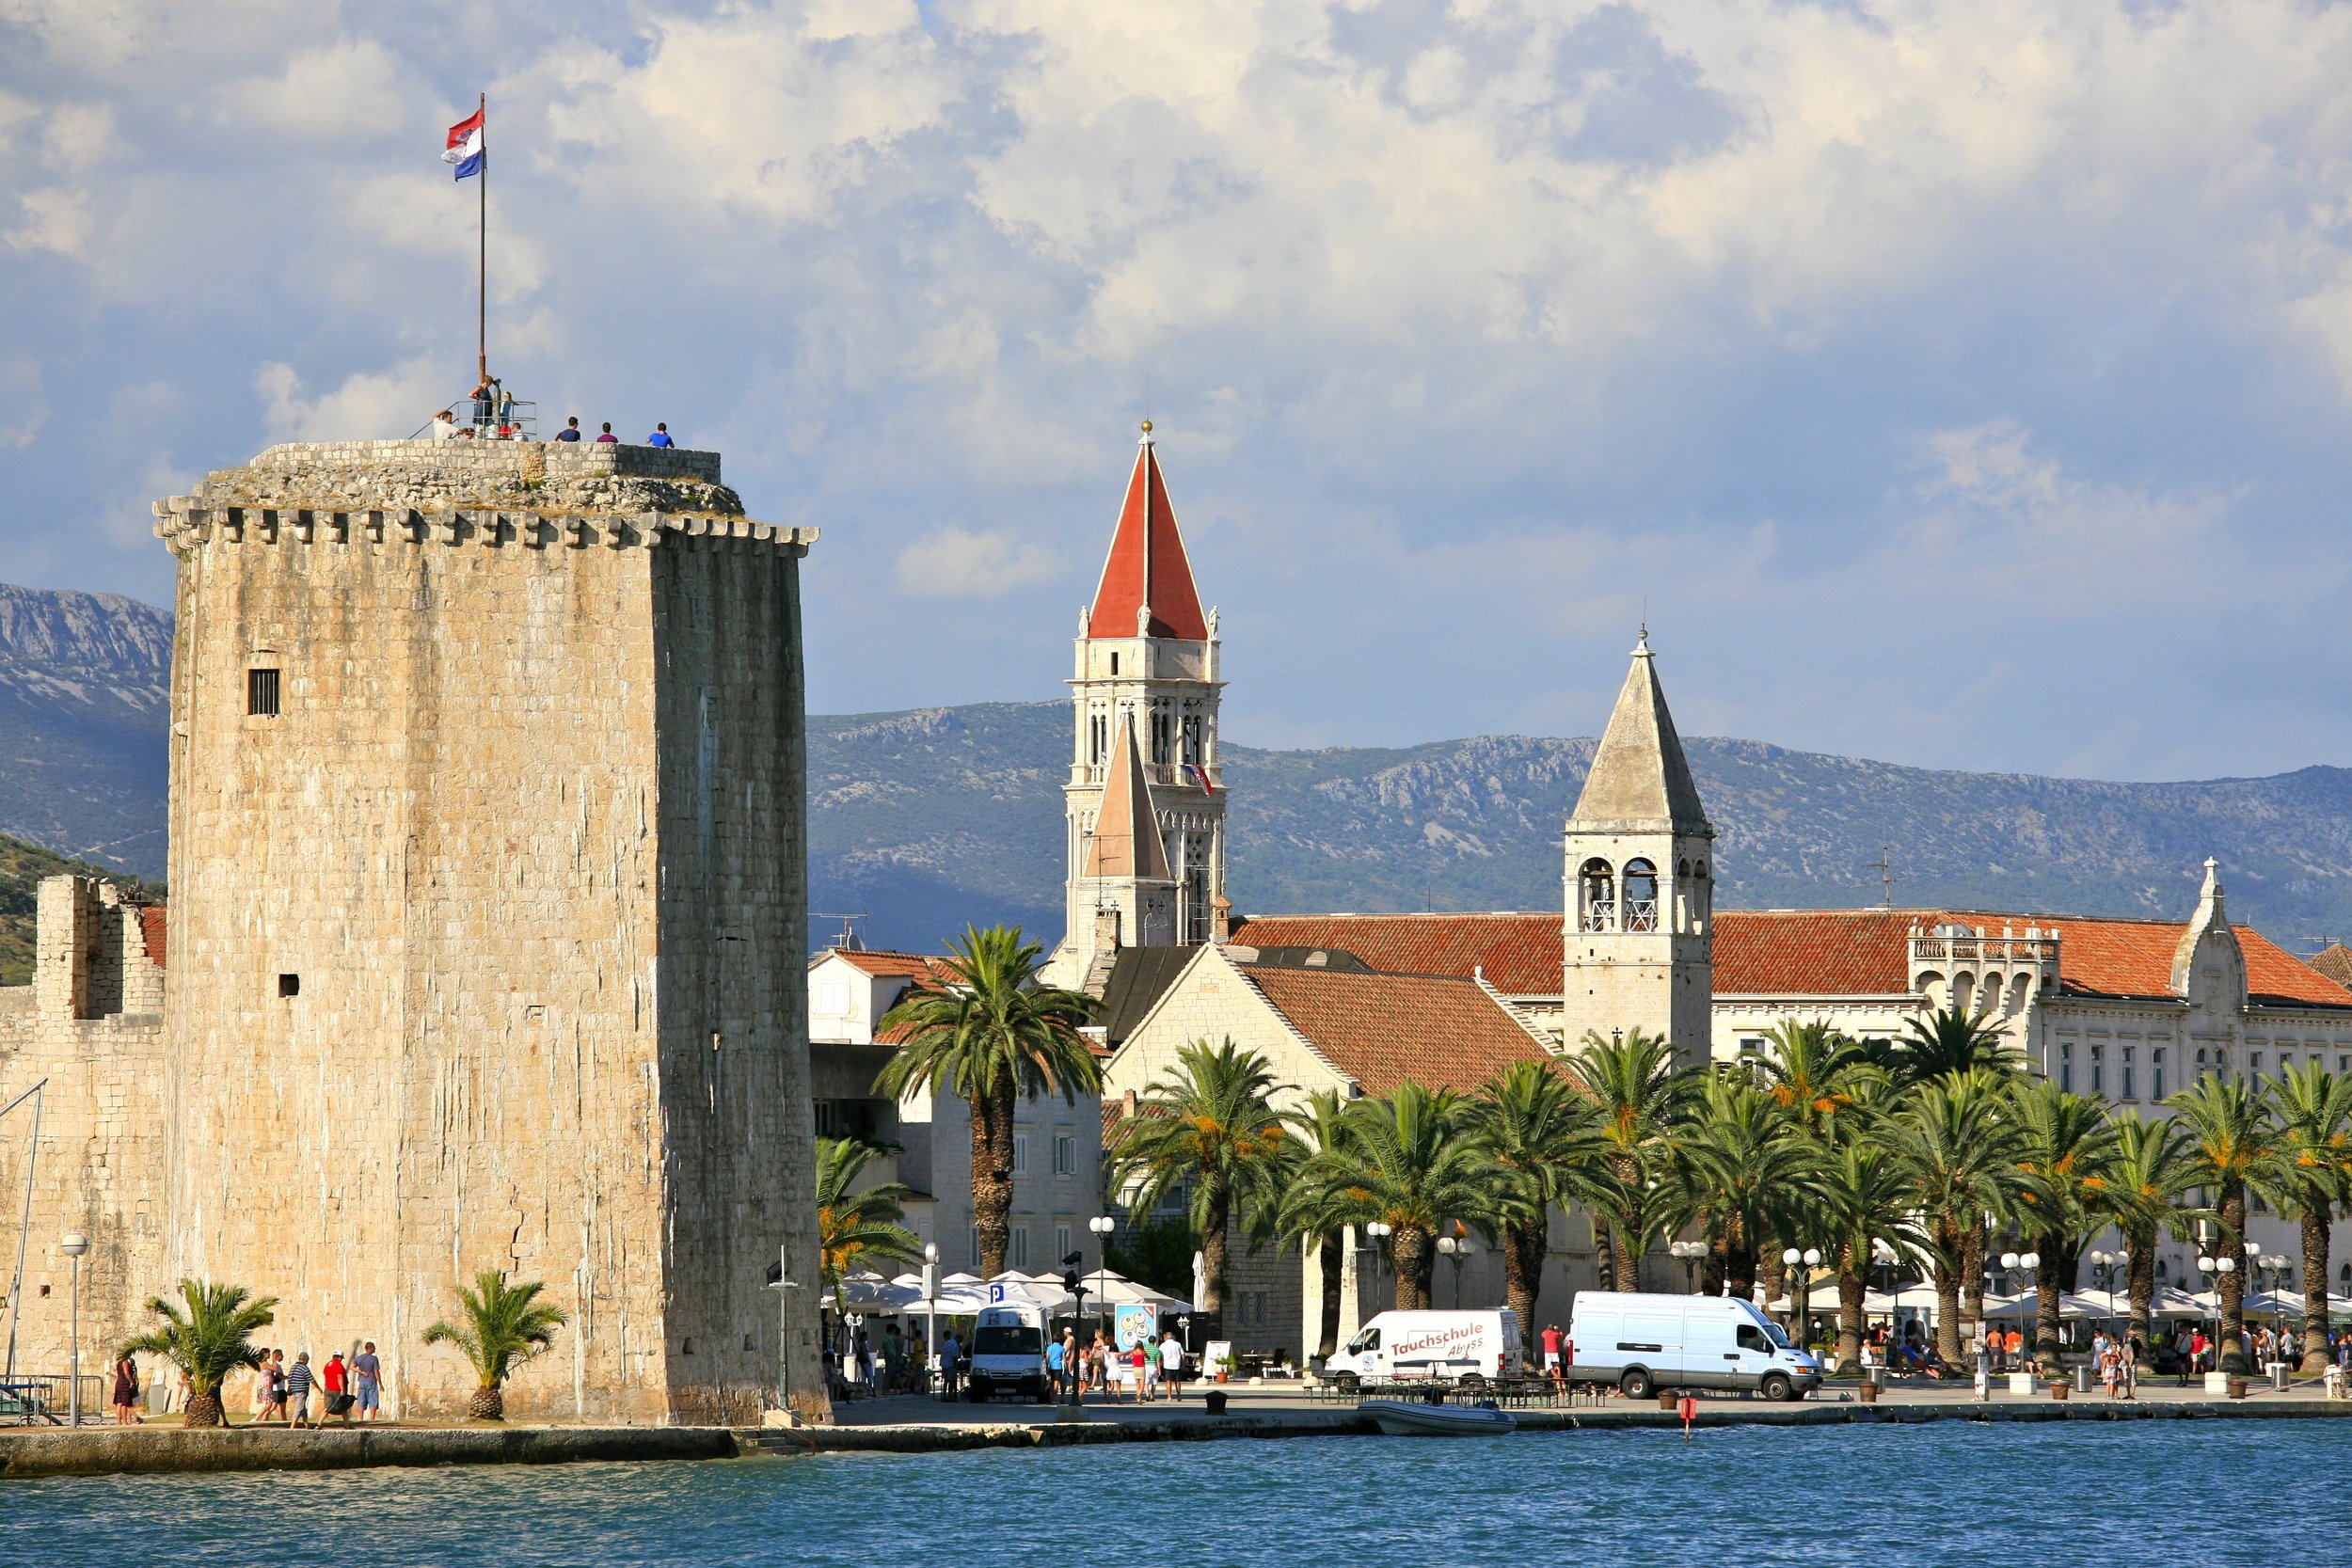 City_of_Trogir_and_the_Tower_of_the_Kamerlengo_Castle_(5975489212).jpg